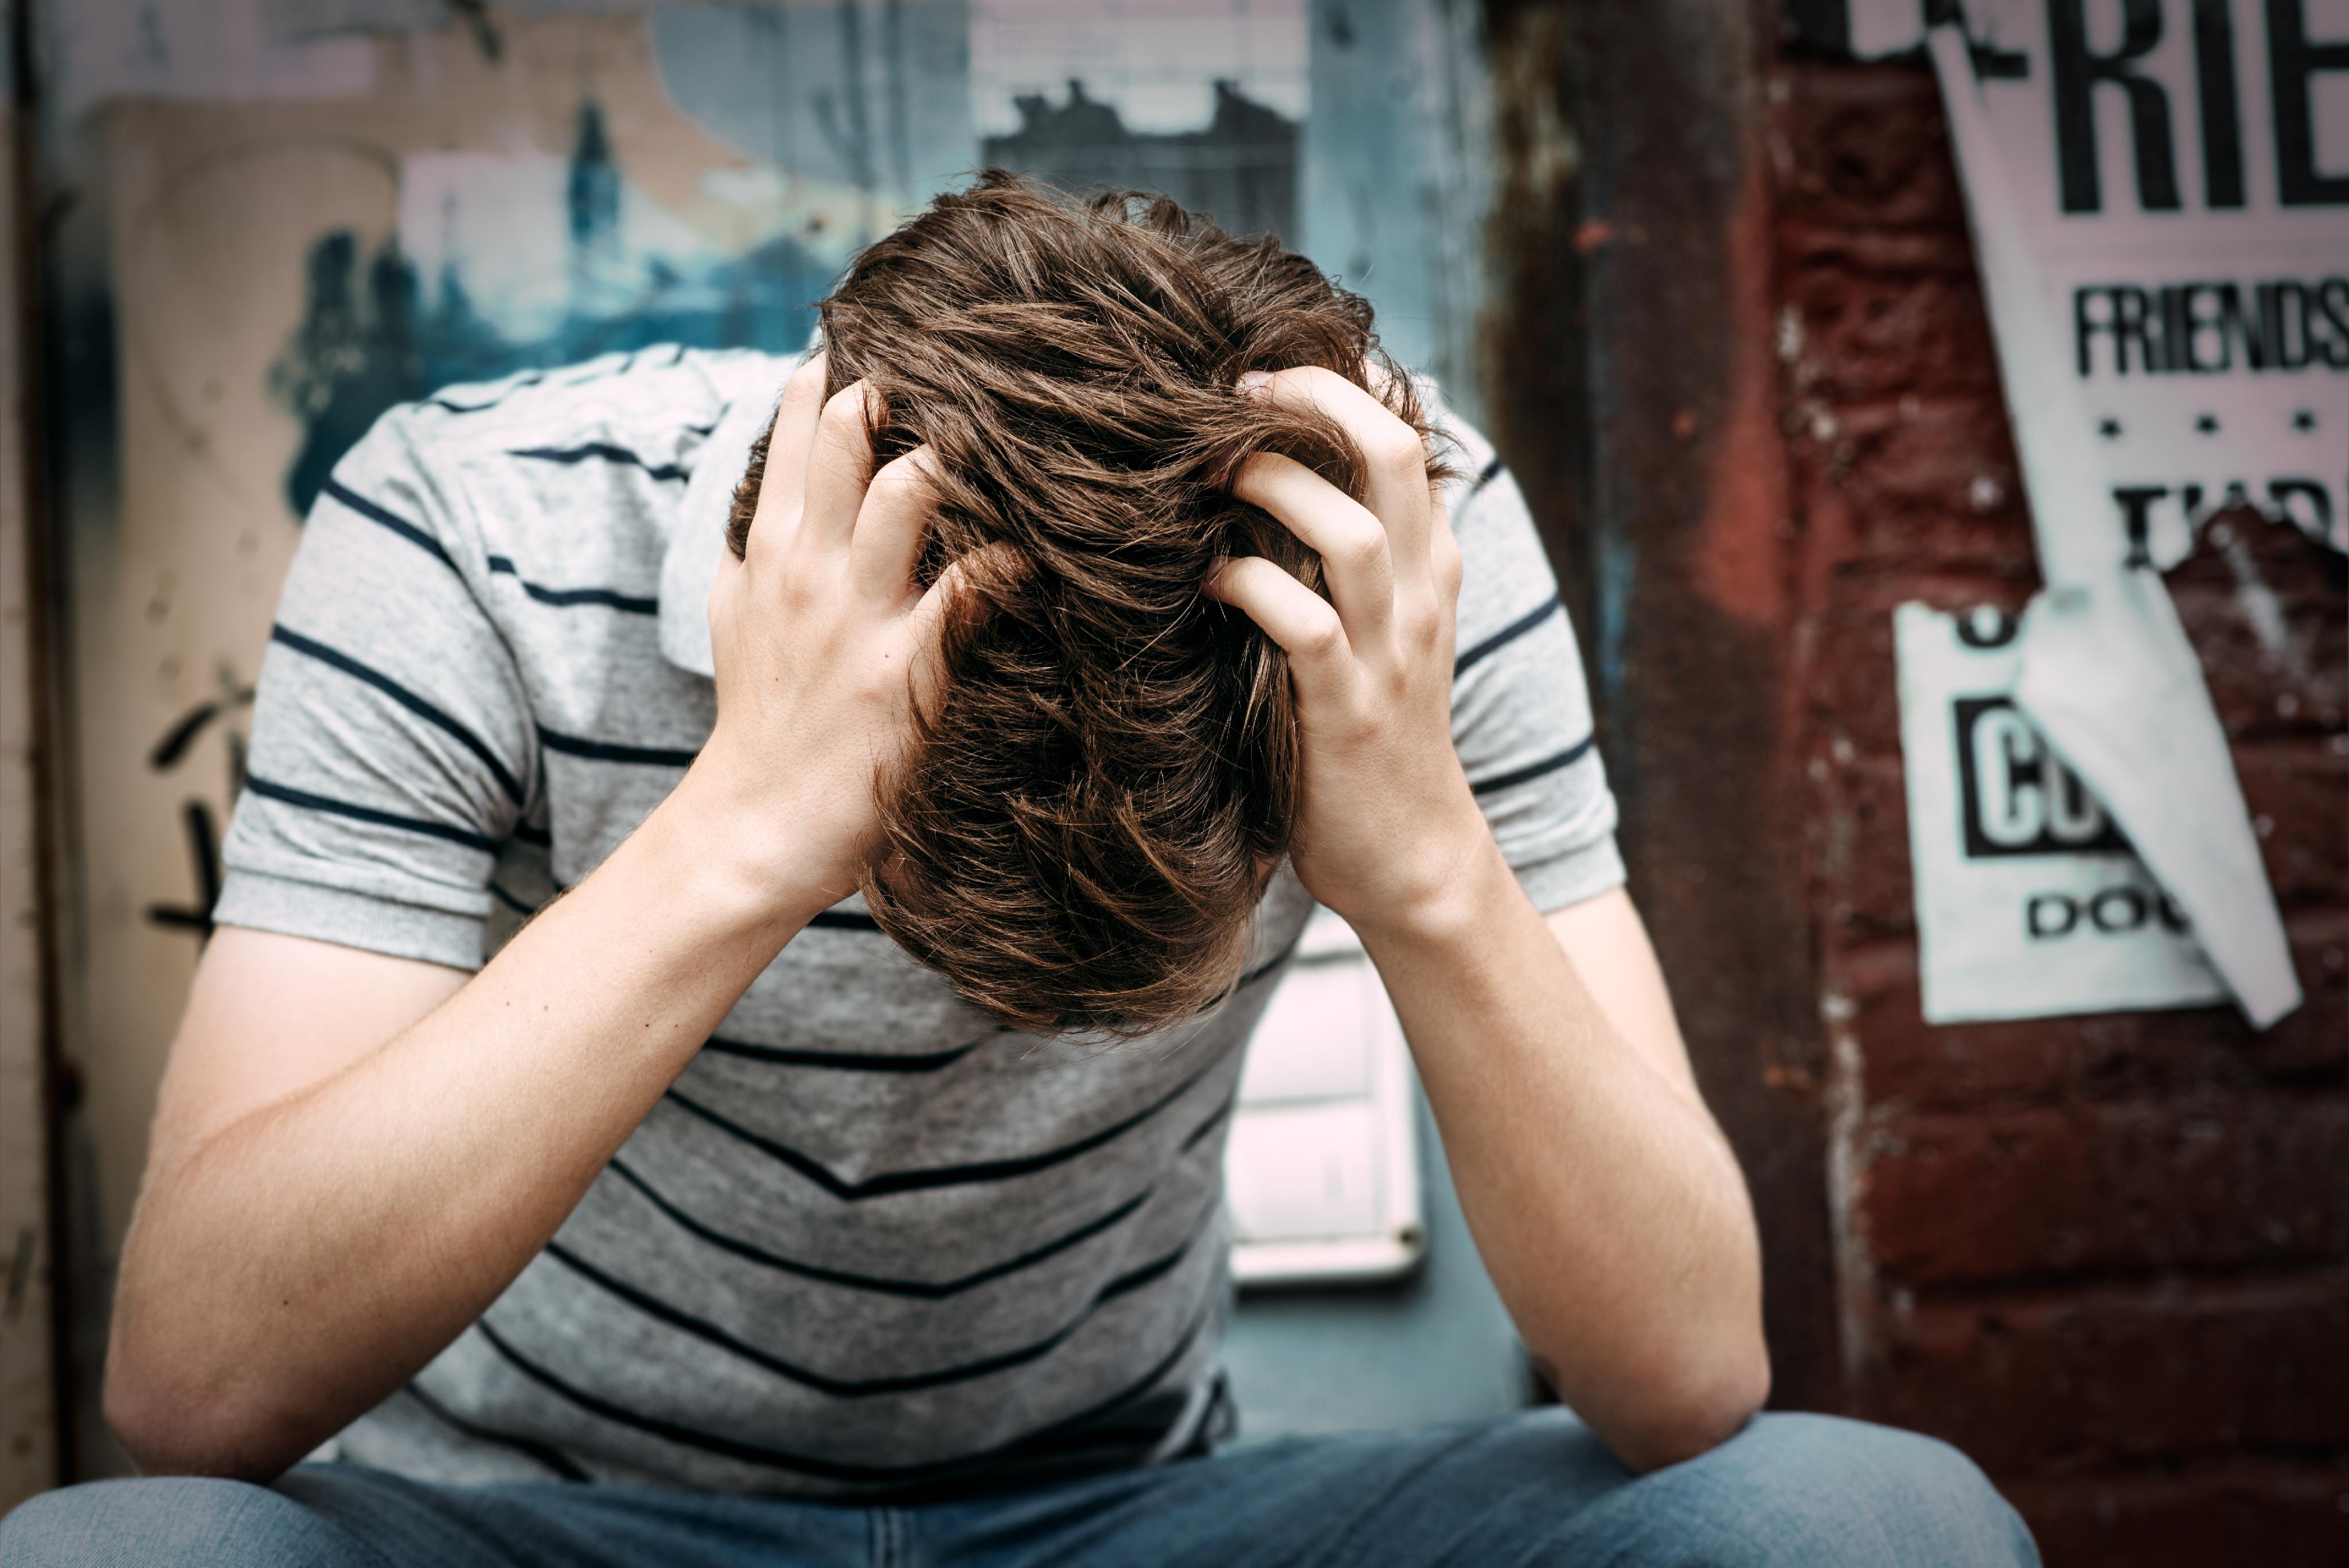 I Want To Kill Myself Suicide: MedlinePlus